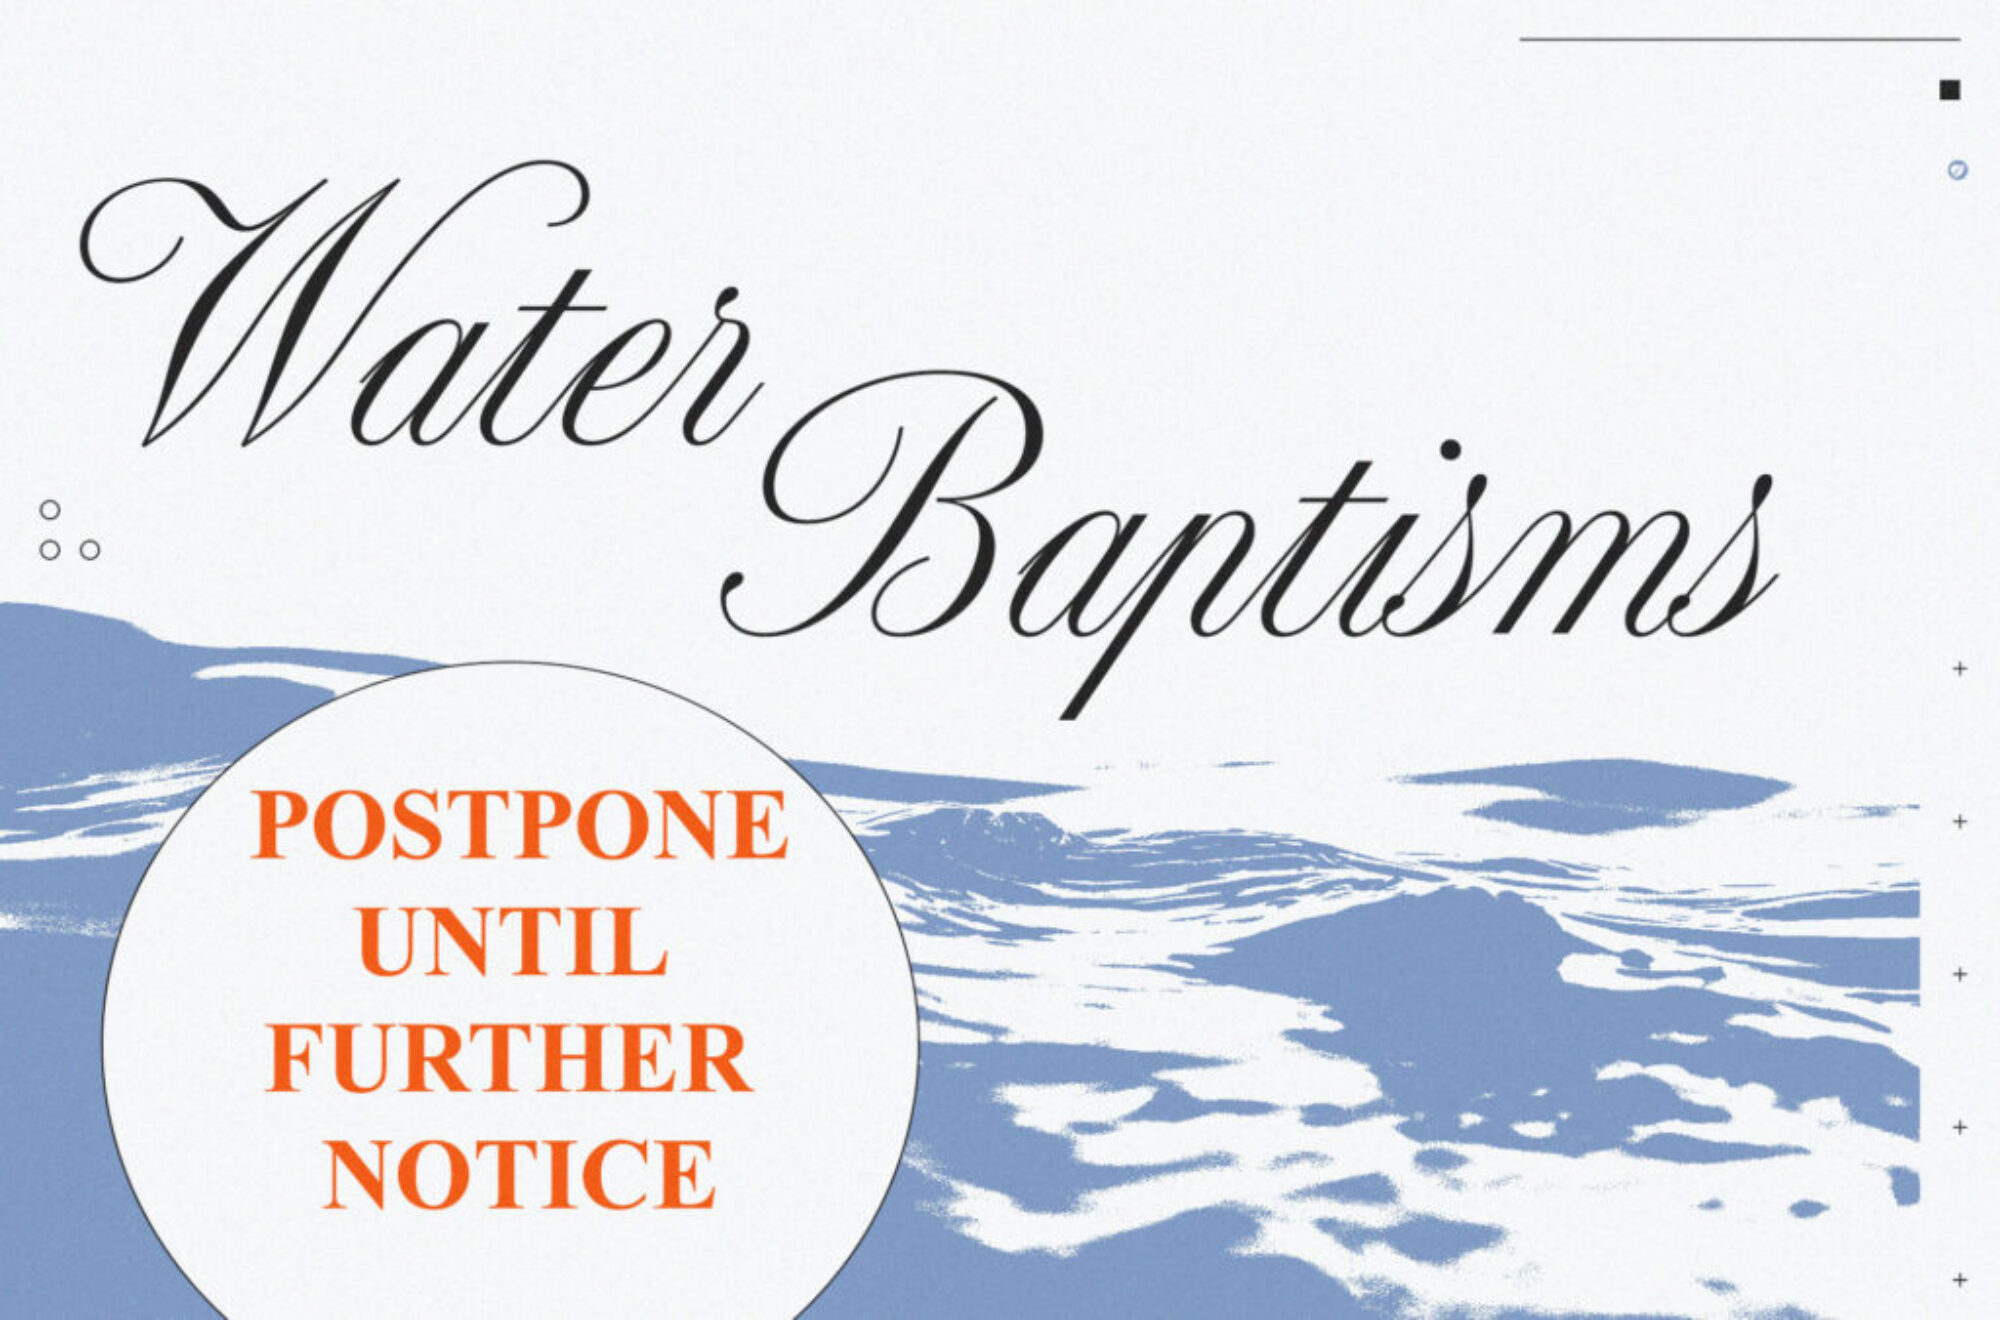 Due to weather conditions, water baptisms have been postpone